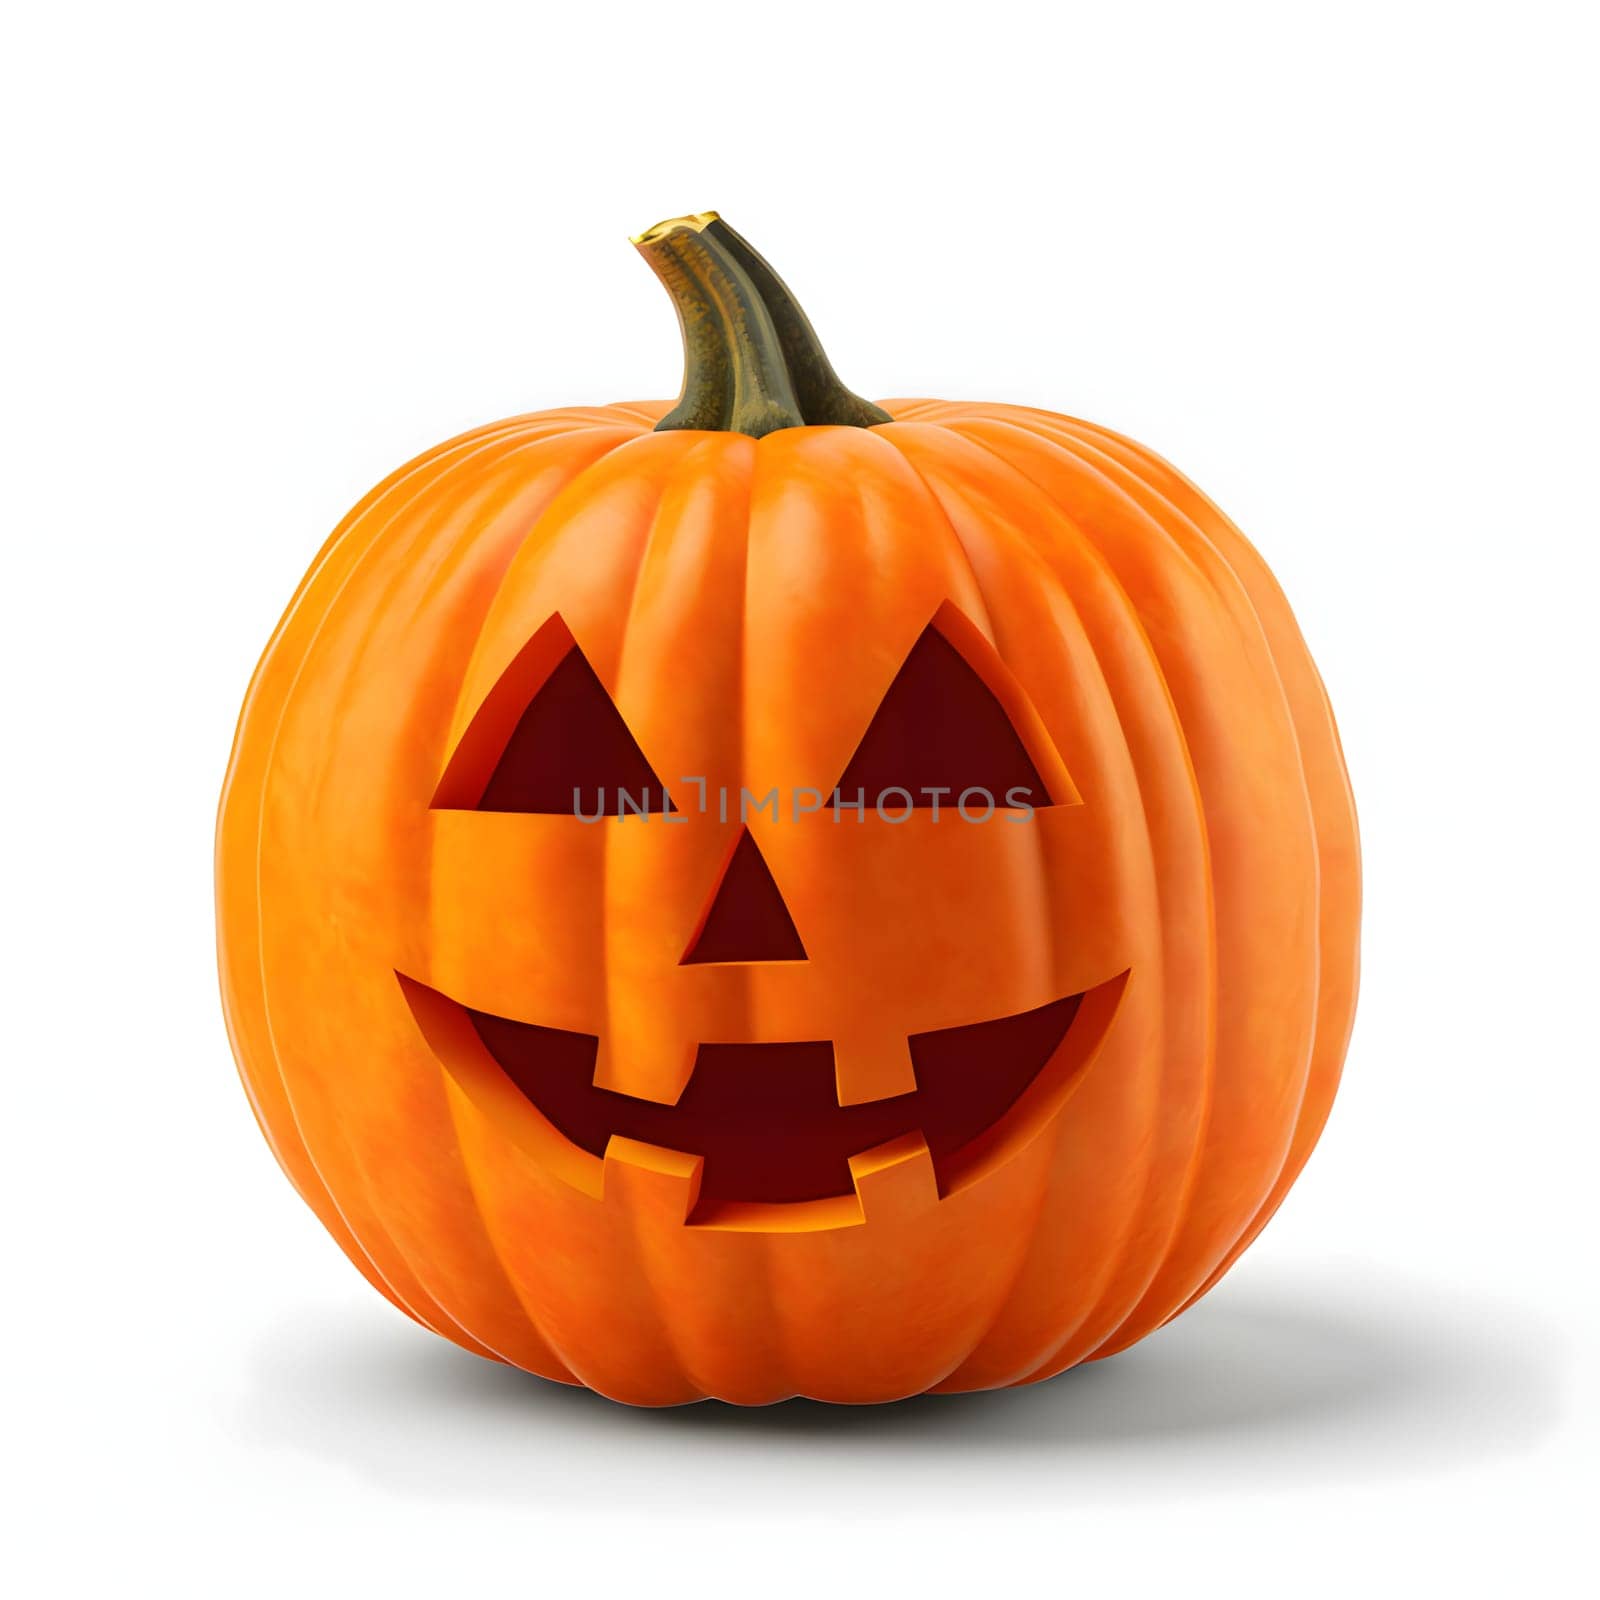 Jack-o-lantern pumpkin up close, Halloween image on a bright isolated background. by ThemesS